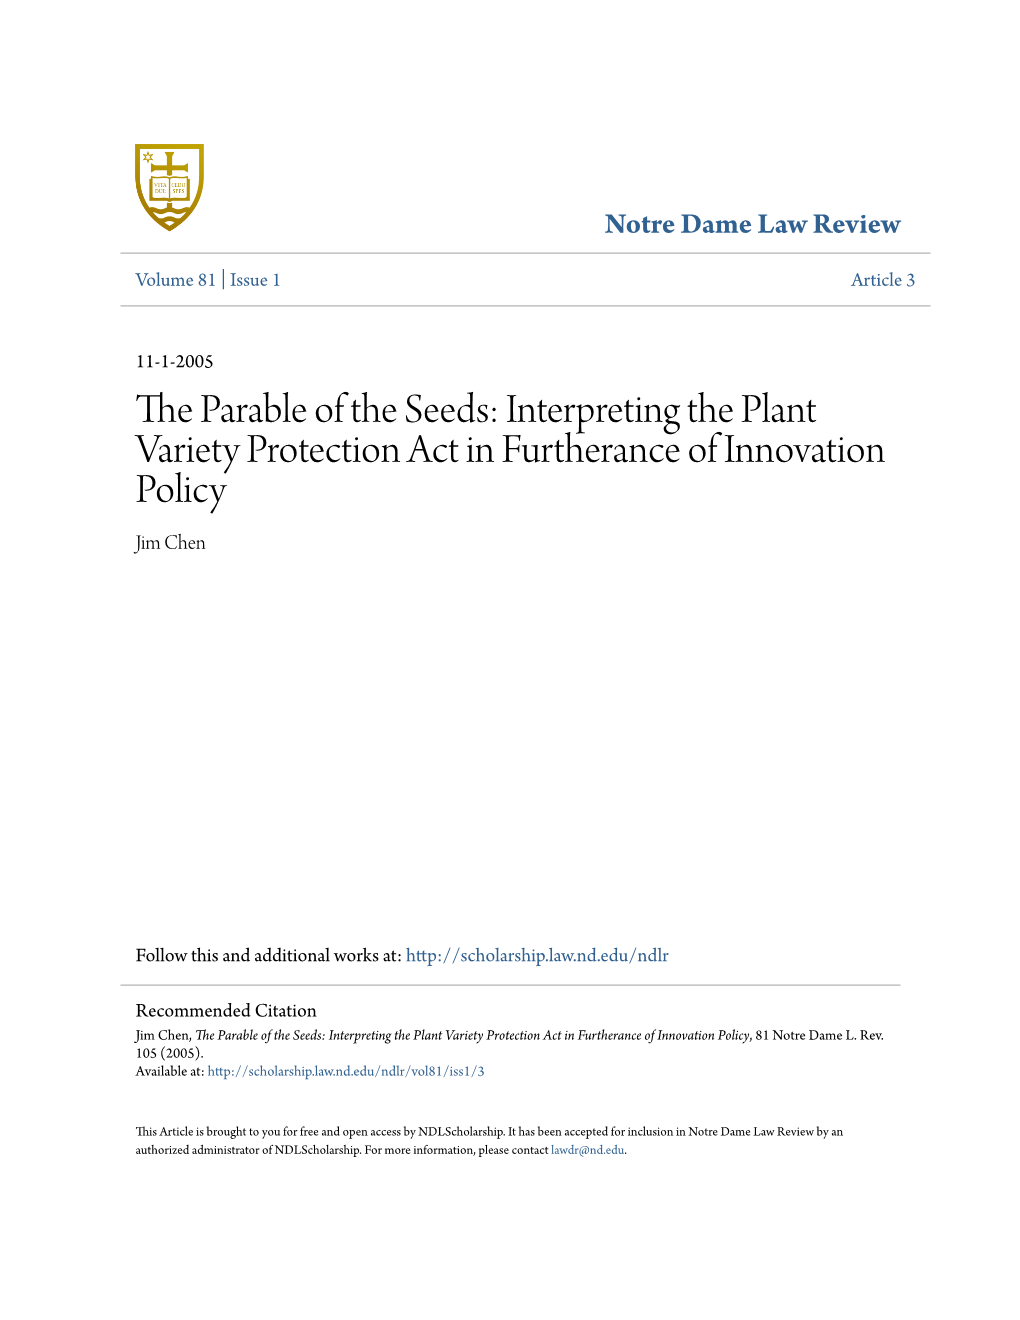 The Parable of the Seeds: Interpreting the Plant Variety Protection Act in Furtherance of Innovation Policy, 81 Notre Dame L